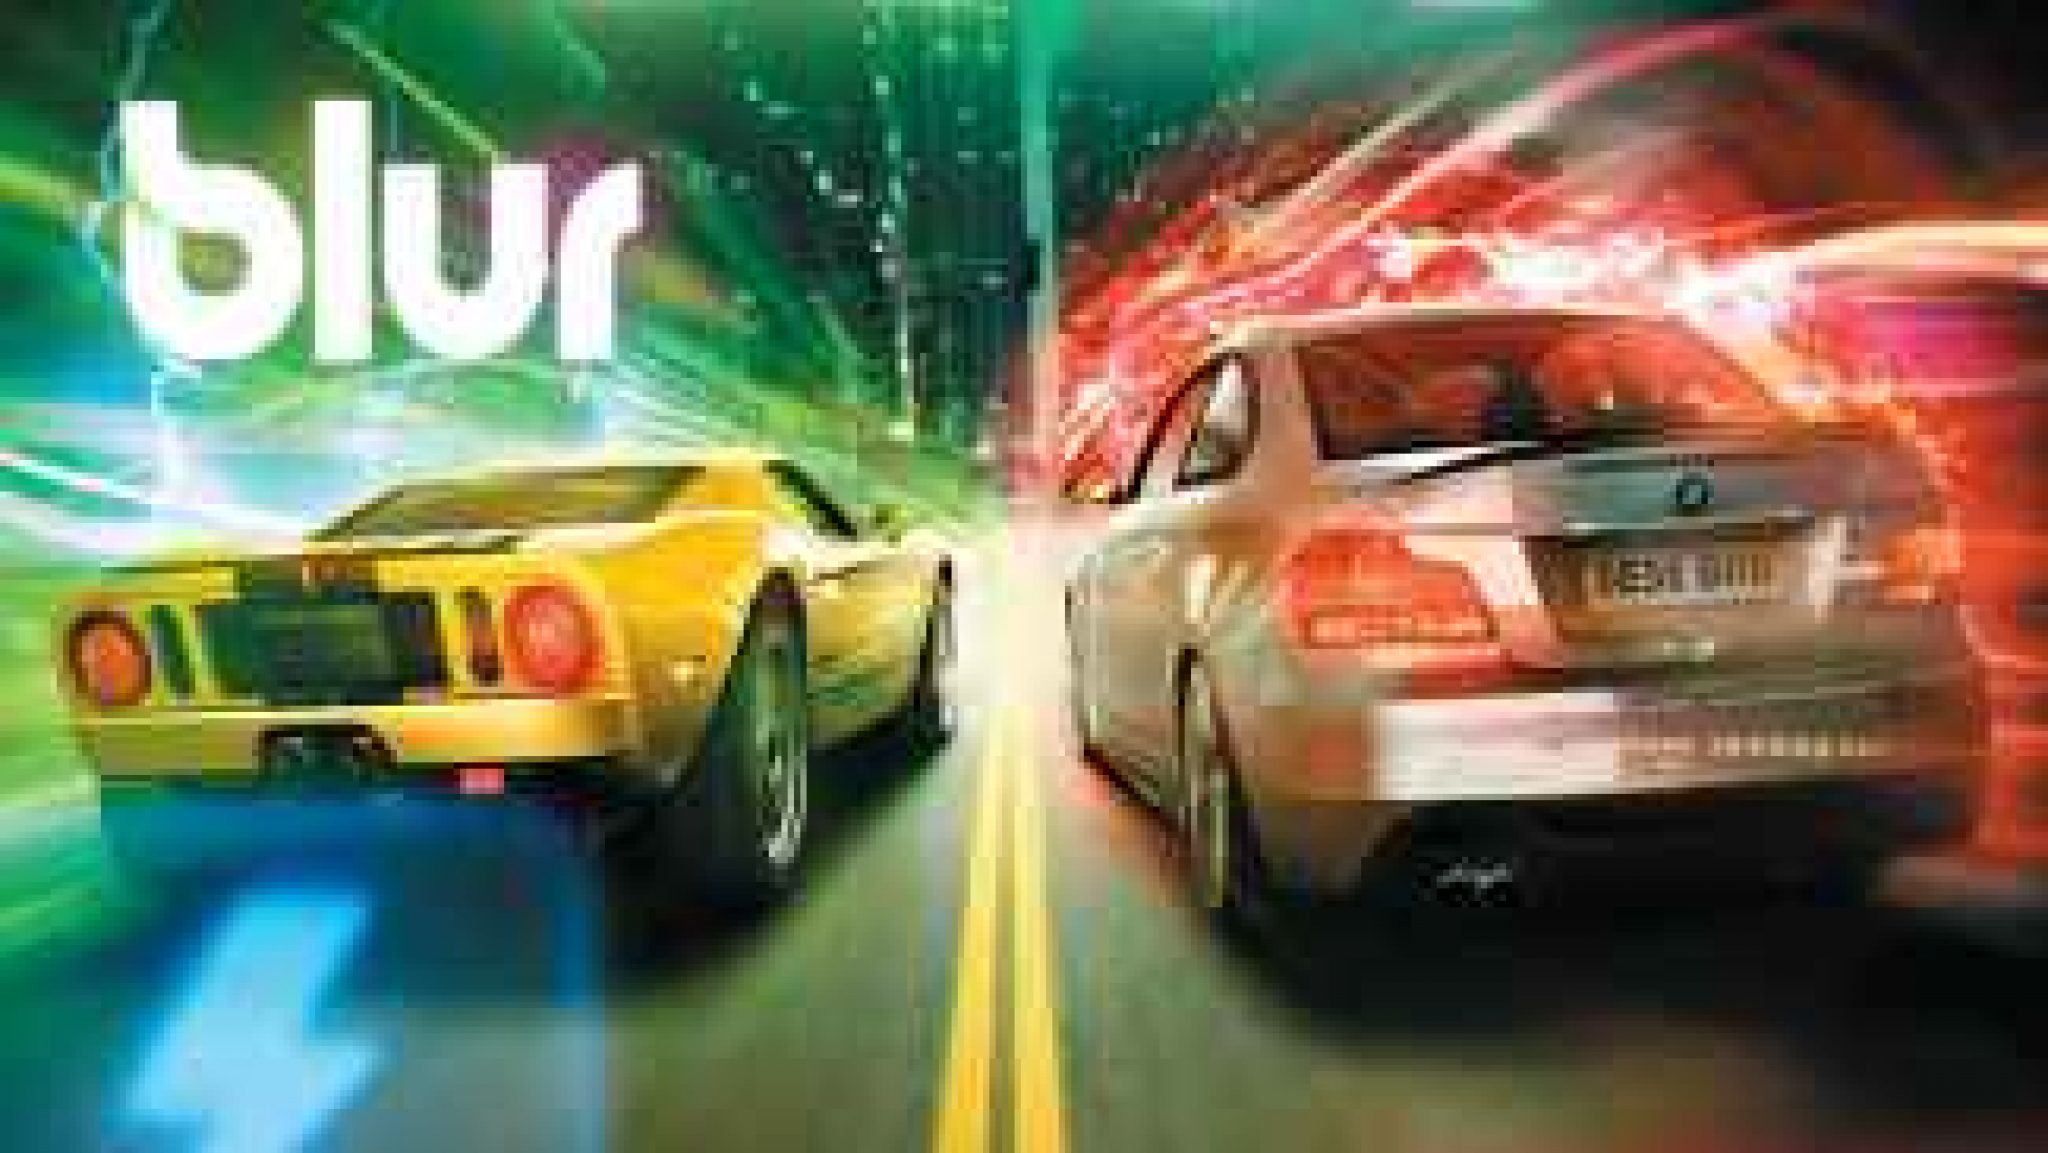 blur pc download highly compressed